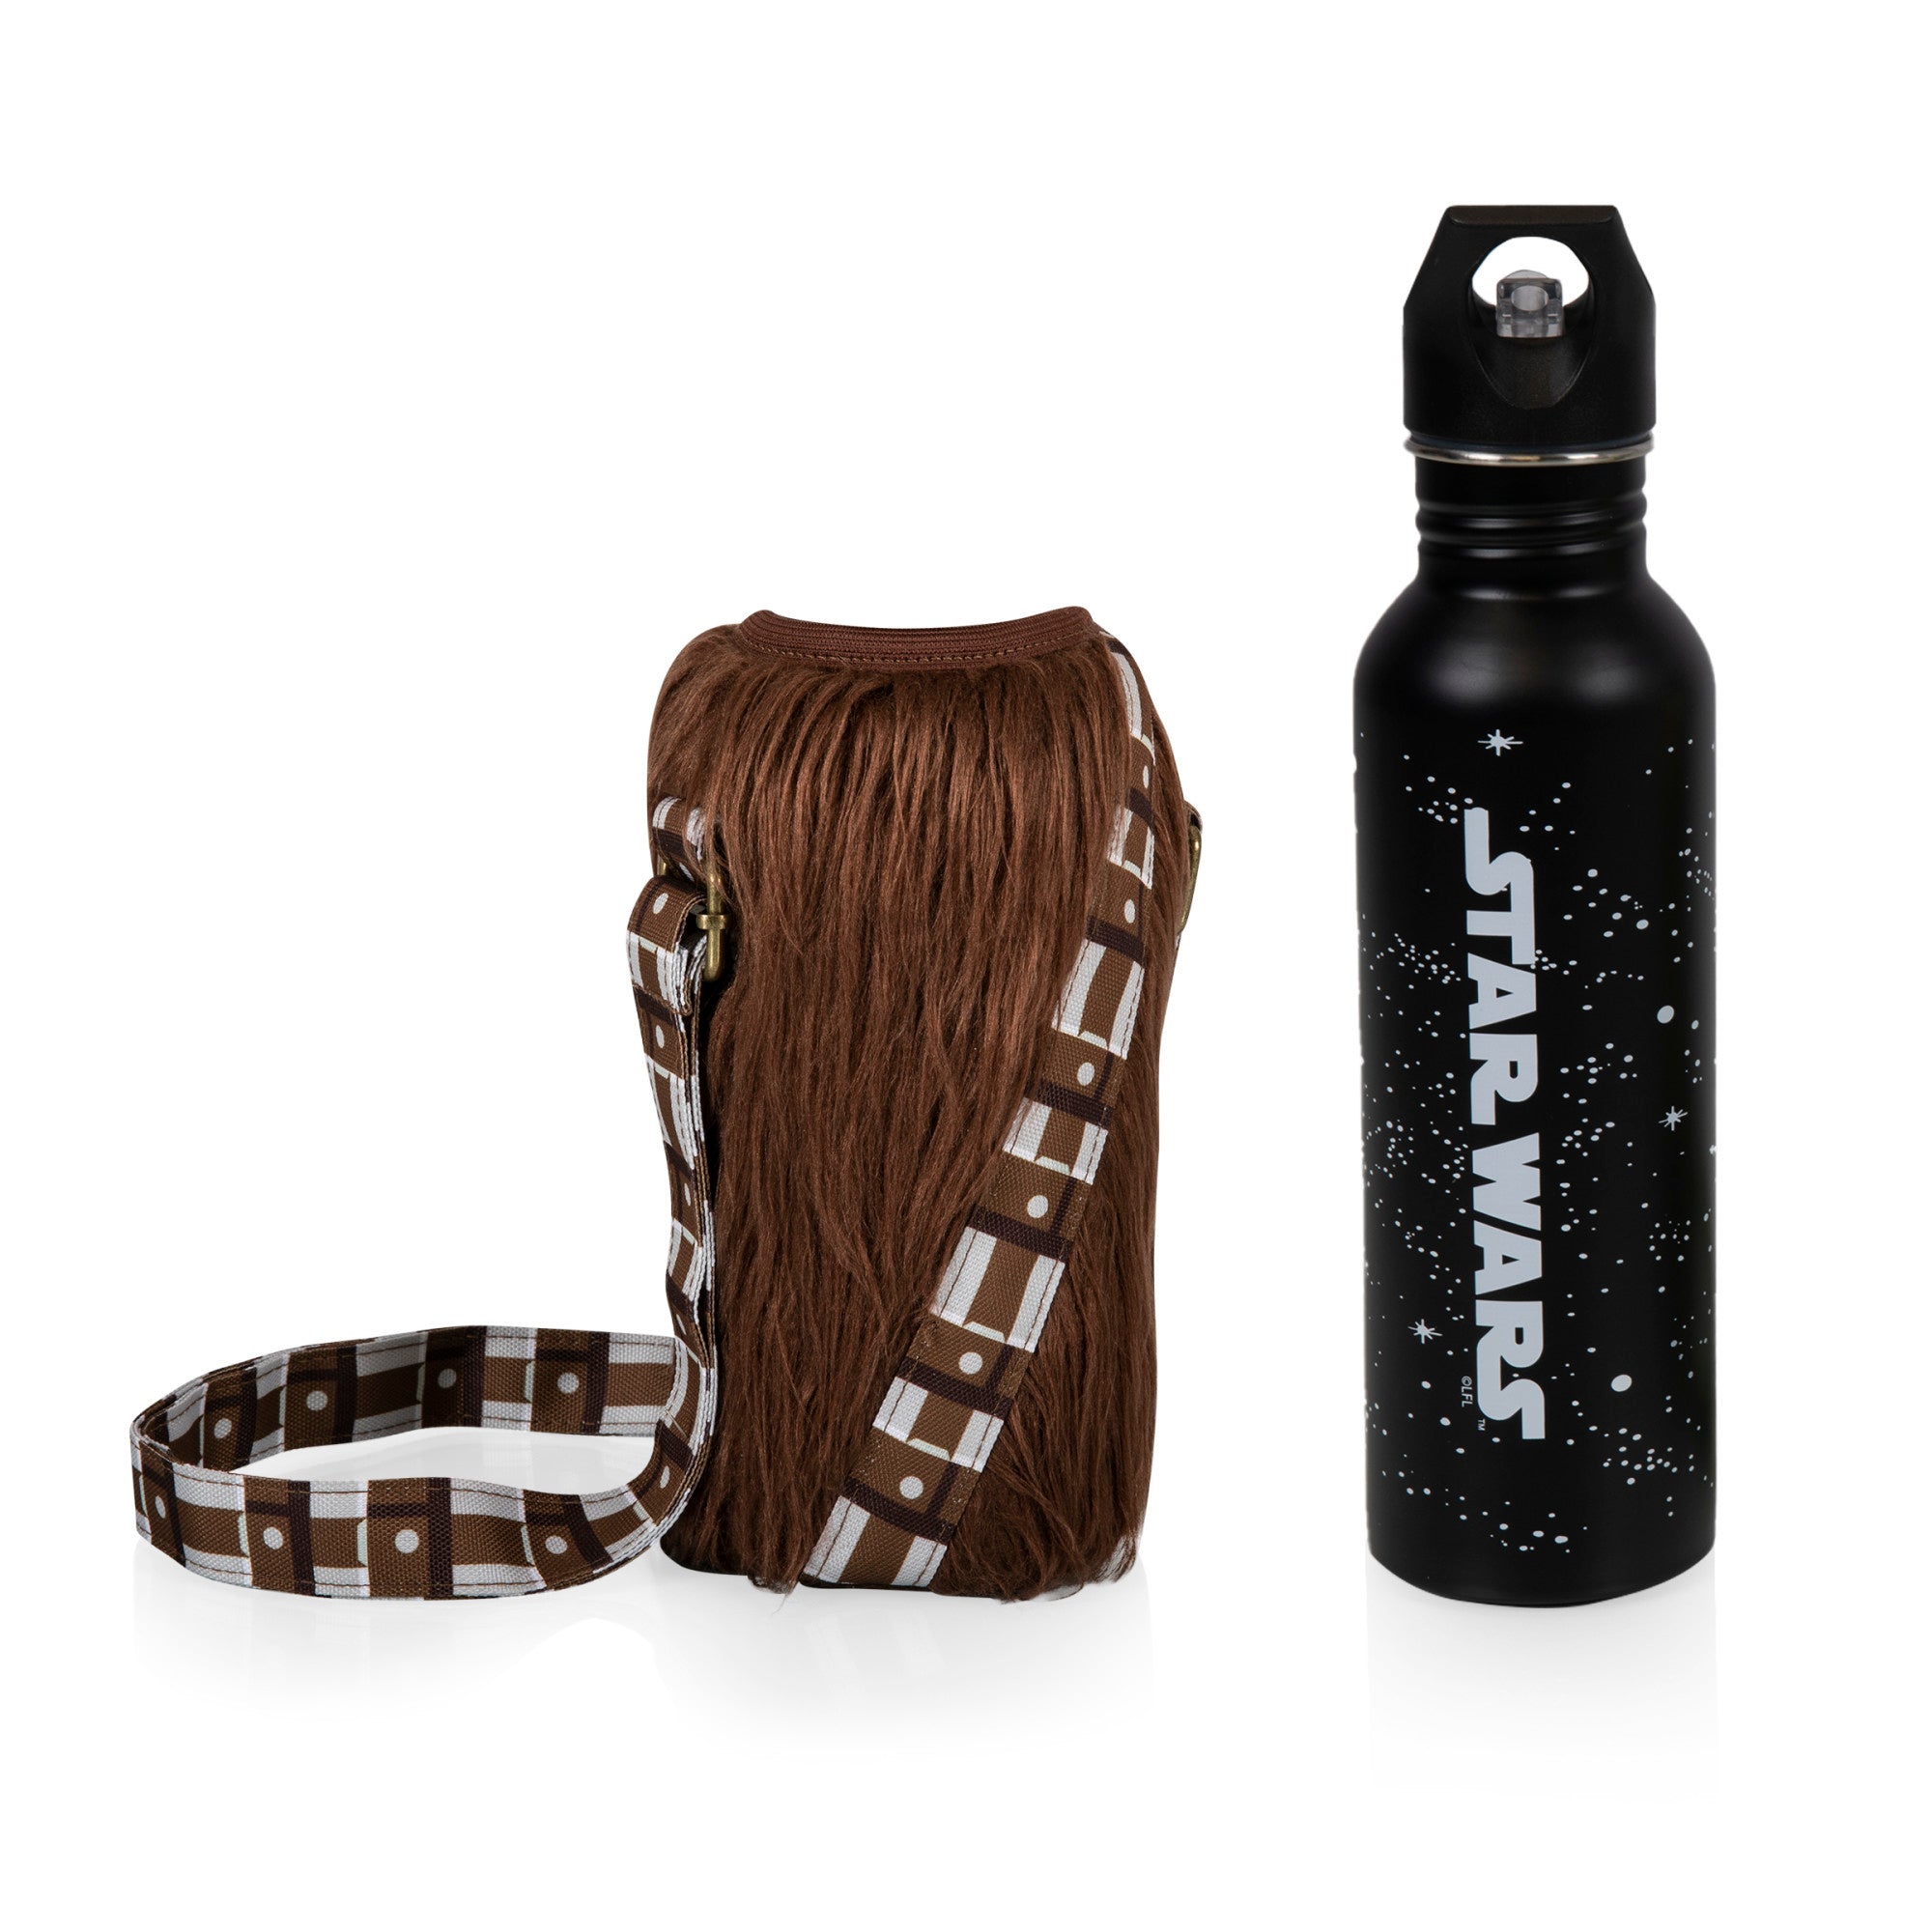 Star Wars - Bottle Cooler with Bottle – PICNIC TIME FAMILY OF BRANDS